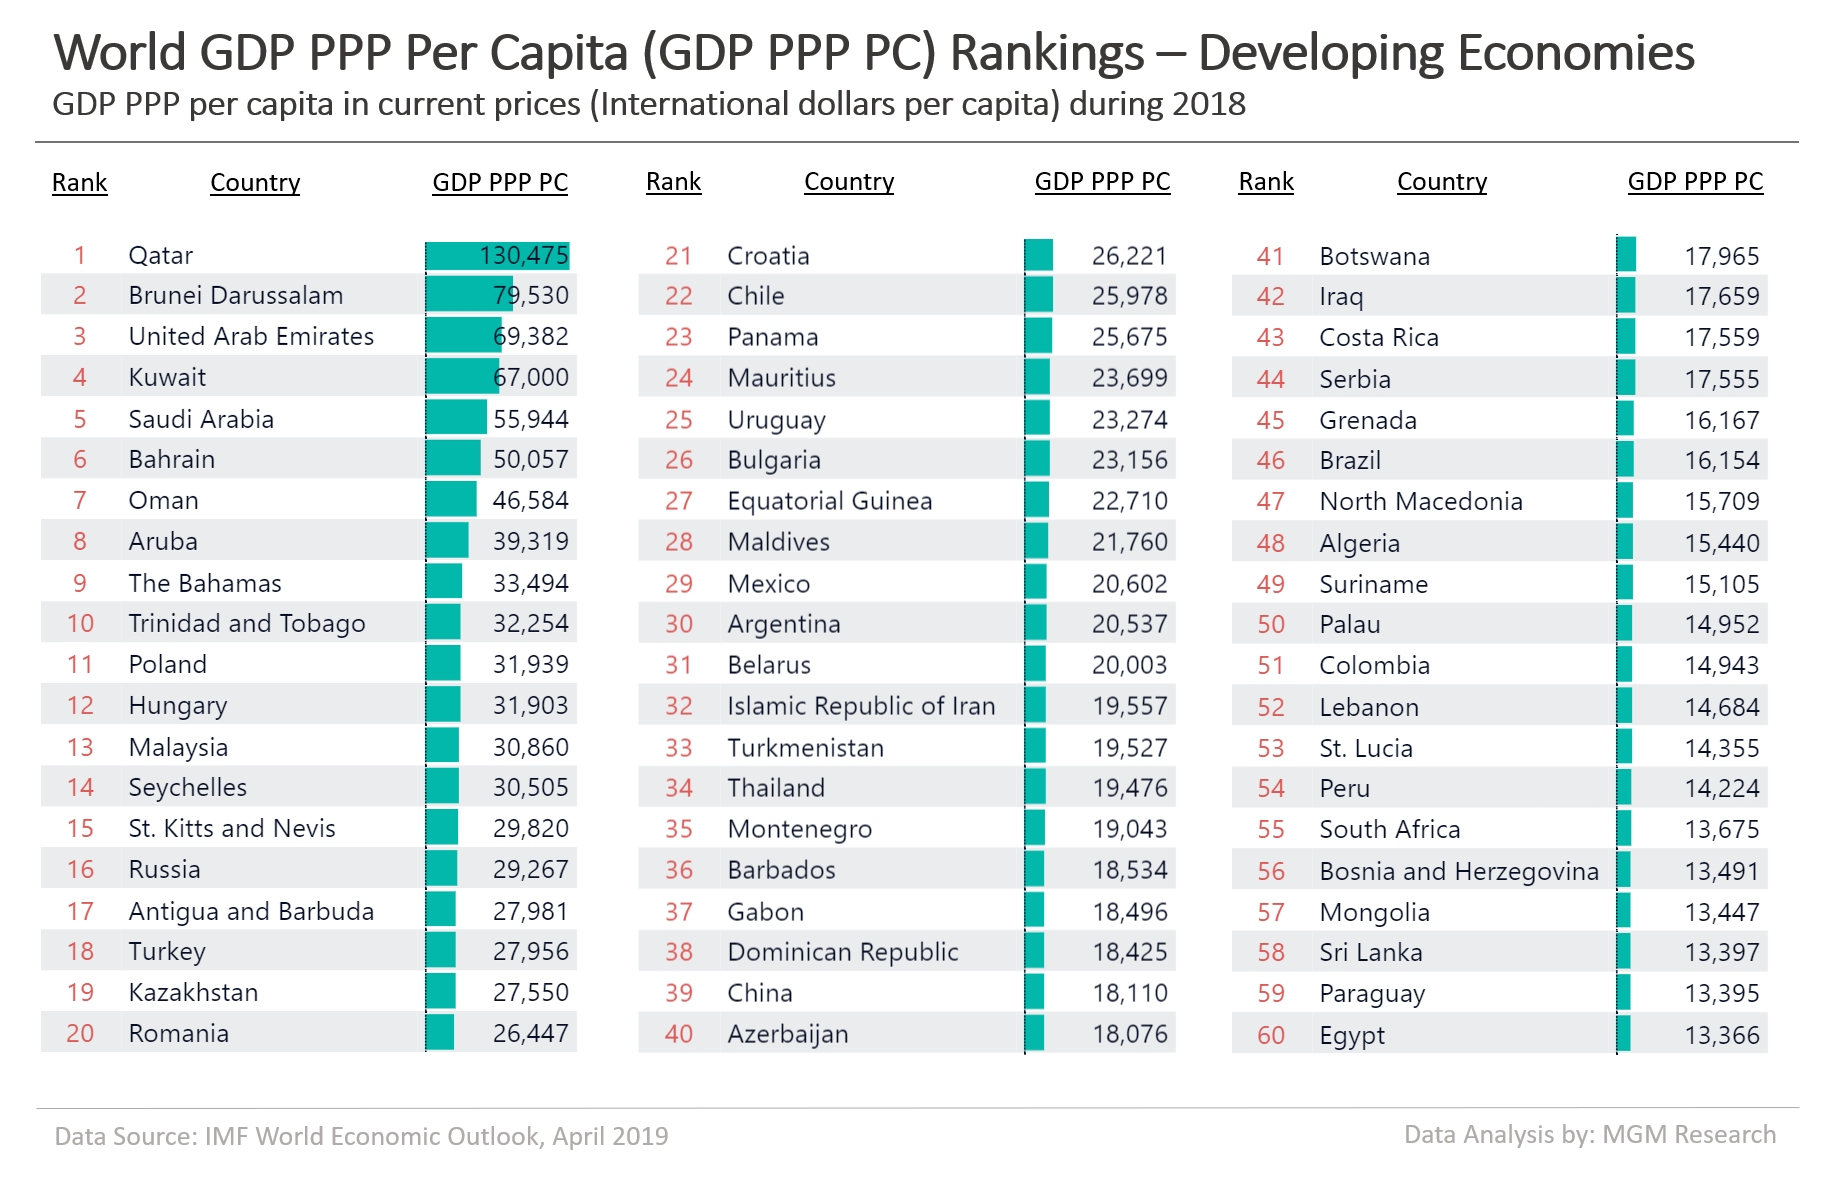 World GDP PPP PC Rankings - developing economies